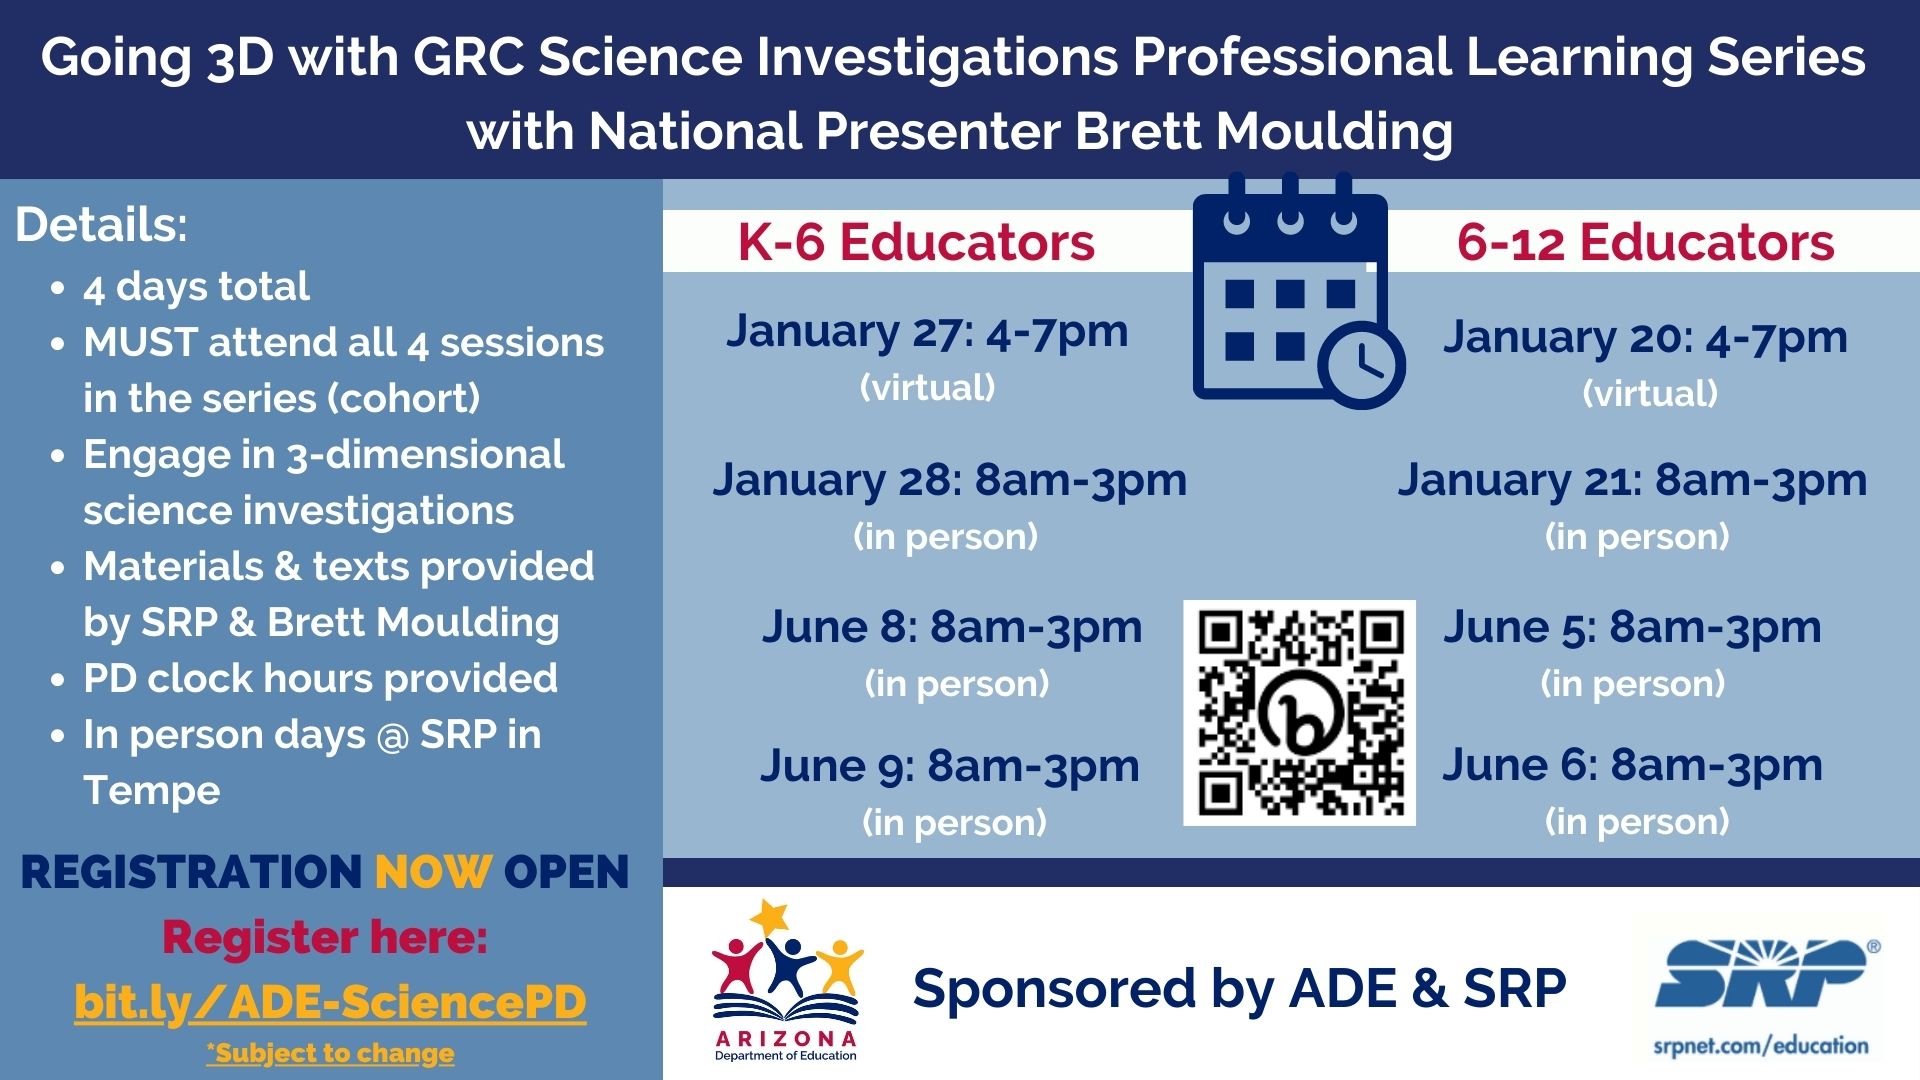 Going 3D with GRC Science Investigations Professional Learning Series